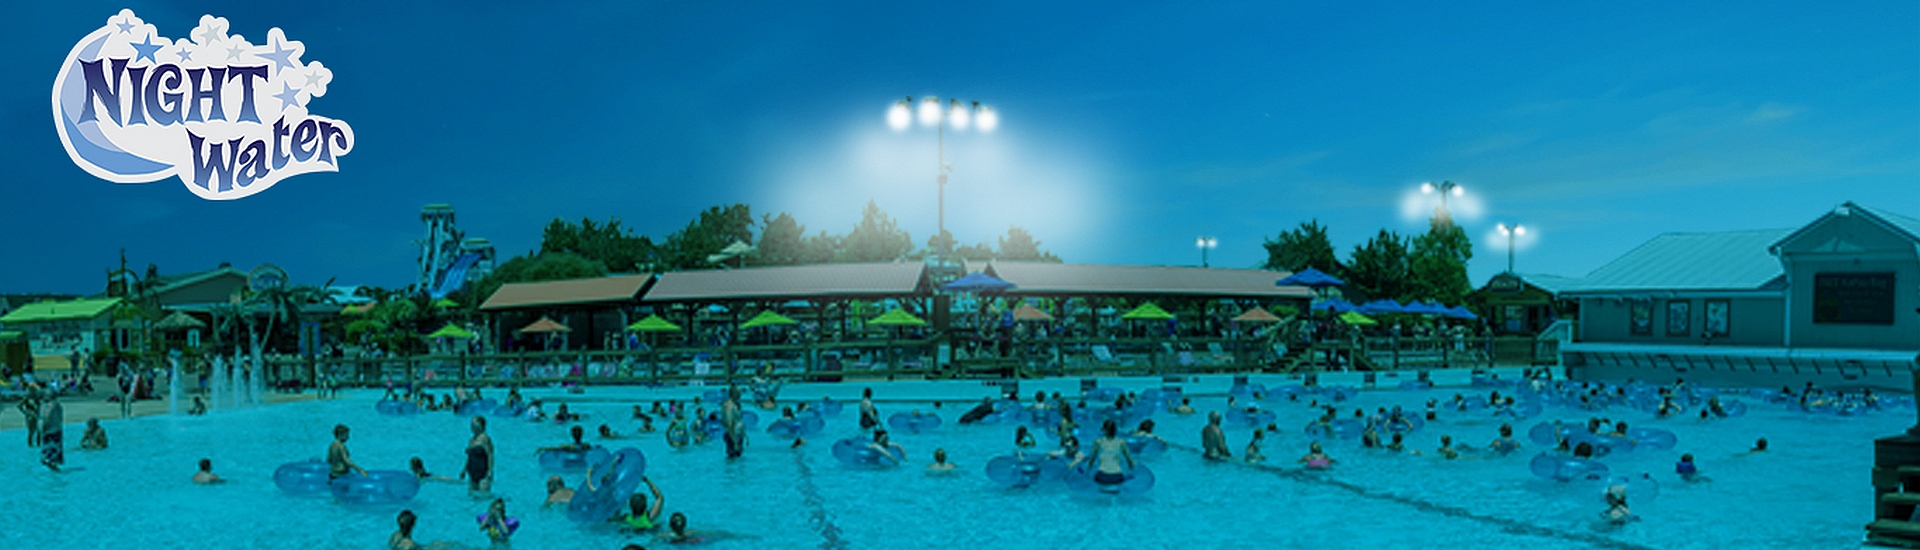 White Water in Branson Open Late for "Night Water!" Branson Travel Office